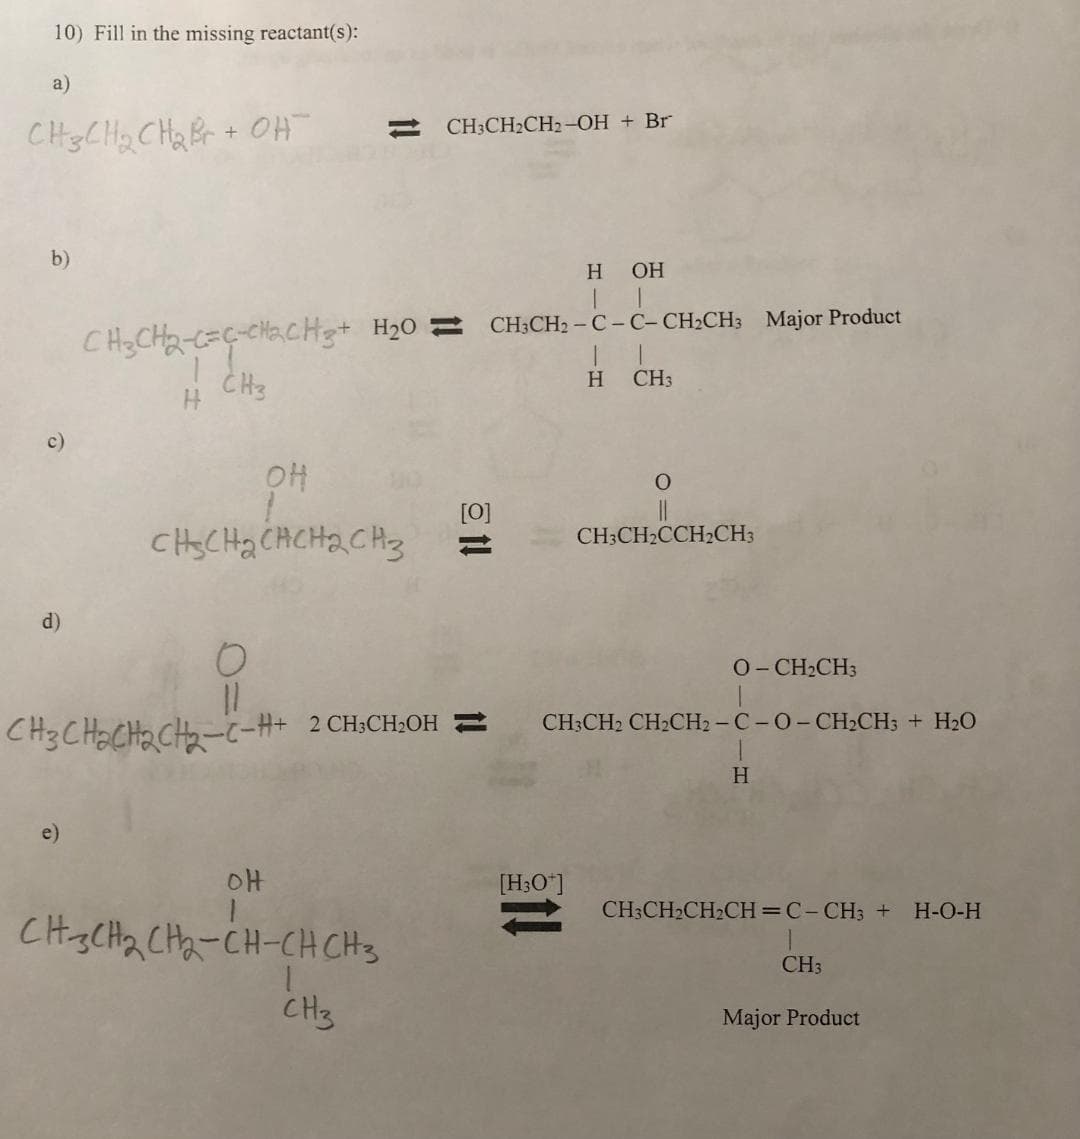 10) Fill in the missing reactant(s):
a)
CH3CH₂ CH₂ Br+ OH¯
b)
d)
e)
1!
H OH
CH₂CH₂-C=C-CH₂CH3 + H₂0 = CH CH₂-C-C-CH₂CH3 Major Product
CH3
II
H CH3
OH
снасна снсна сиз
OH
CH3CH₂CH2-OH + Br
CH3CH₂CH₂-CH-CH CH 3
1
CH3
Et!
O-CH2CH3
요
CH3CH₂CH₂CH₂-C-H+ 2 CH3CH₂OH CH3CH₂ CH₂CH₂-C-O-CH₂CH3 + H₂O
H
O
[H3O+]
CH3CH₂CCH₂CH3
CH3CH₂CH₂CH=C-CH3 + H-O-H
CH3
Major Product